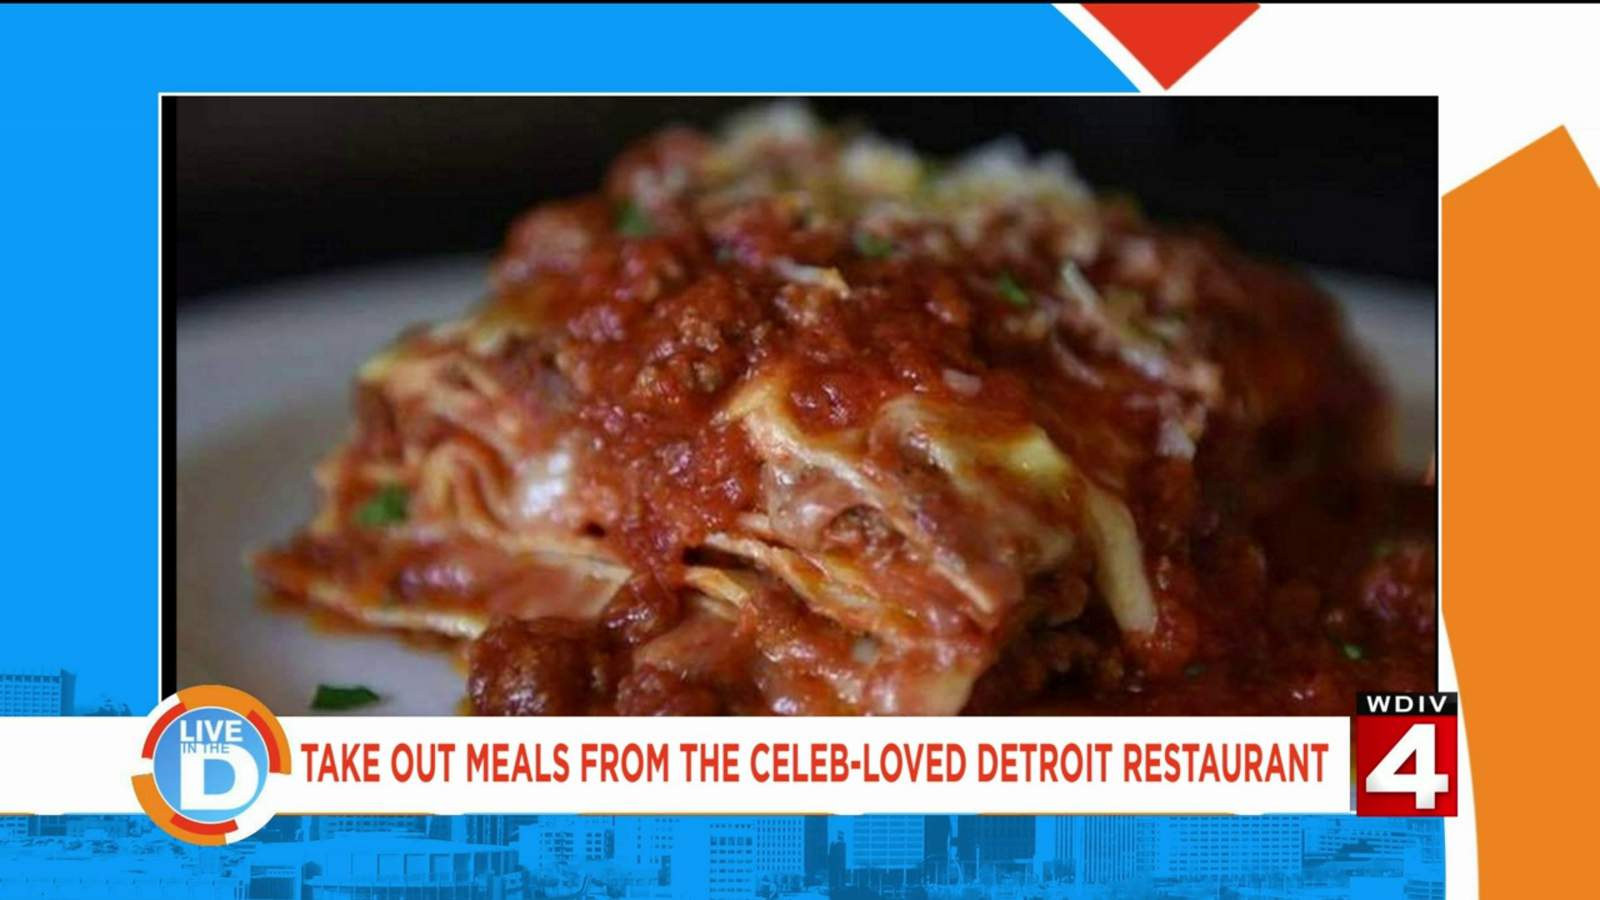 Take out dinner from this celebrity loved Detroit restaurant